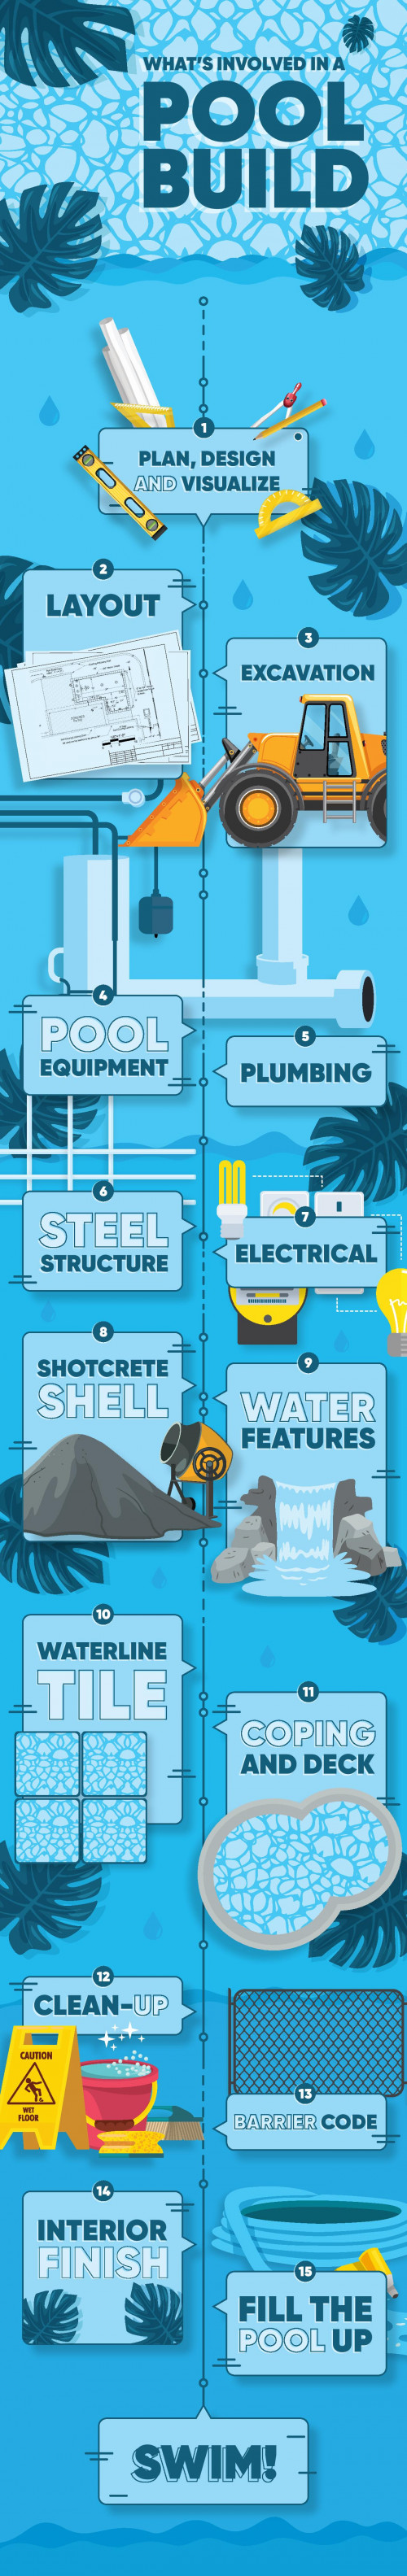 Plan, Design and Visualize - https://copperleafpools.com/